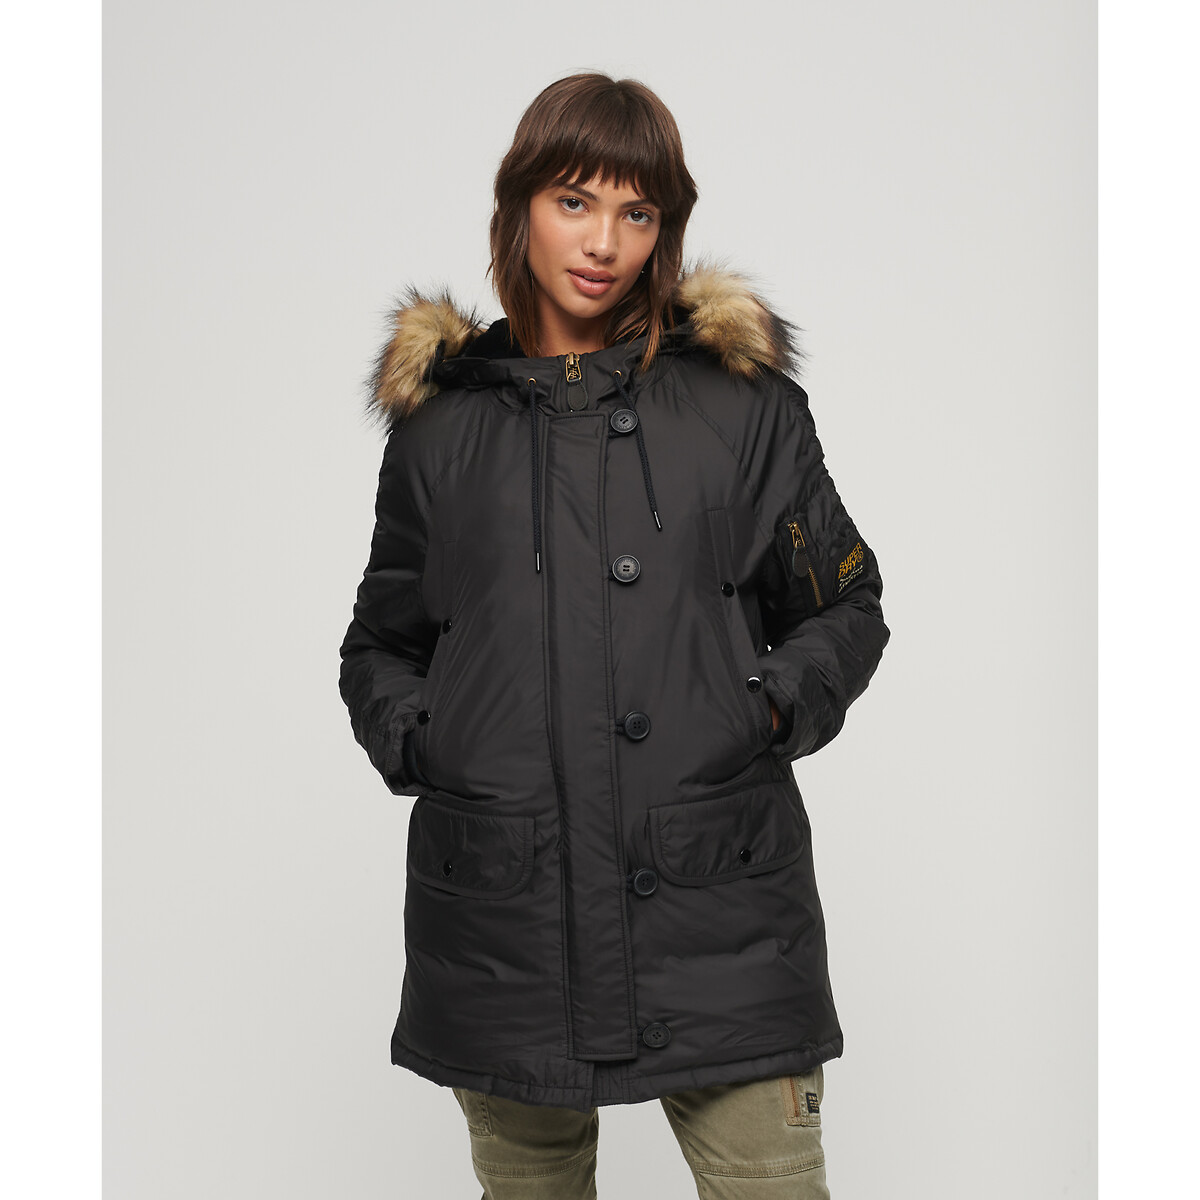 Hooded mid-length parka with faux fur trim, black, Superdry | La Redoute